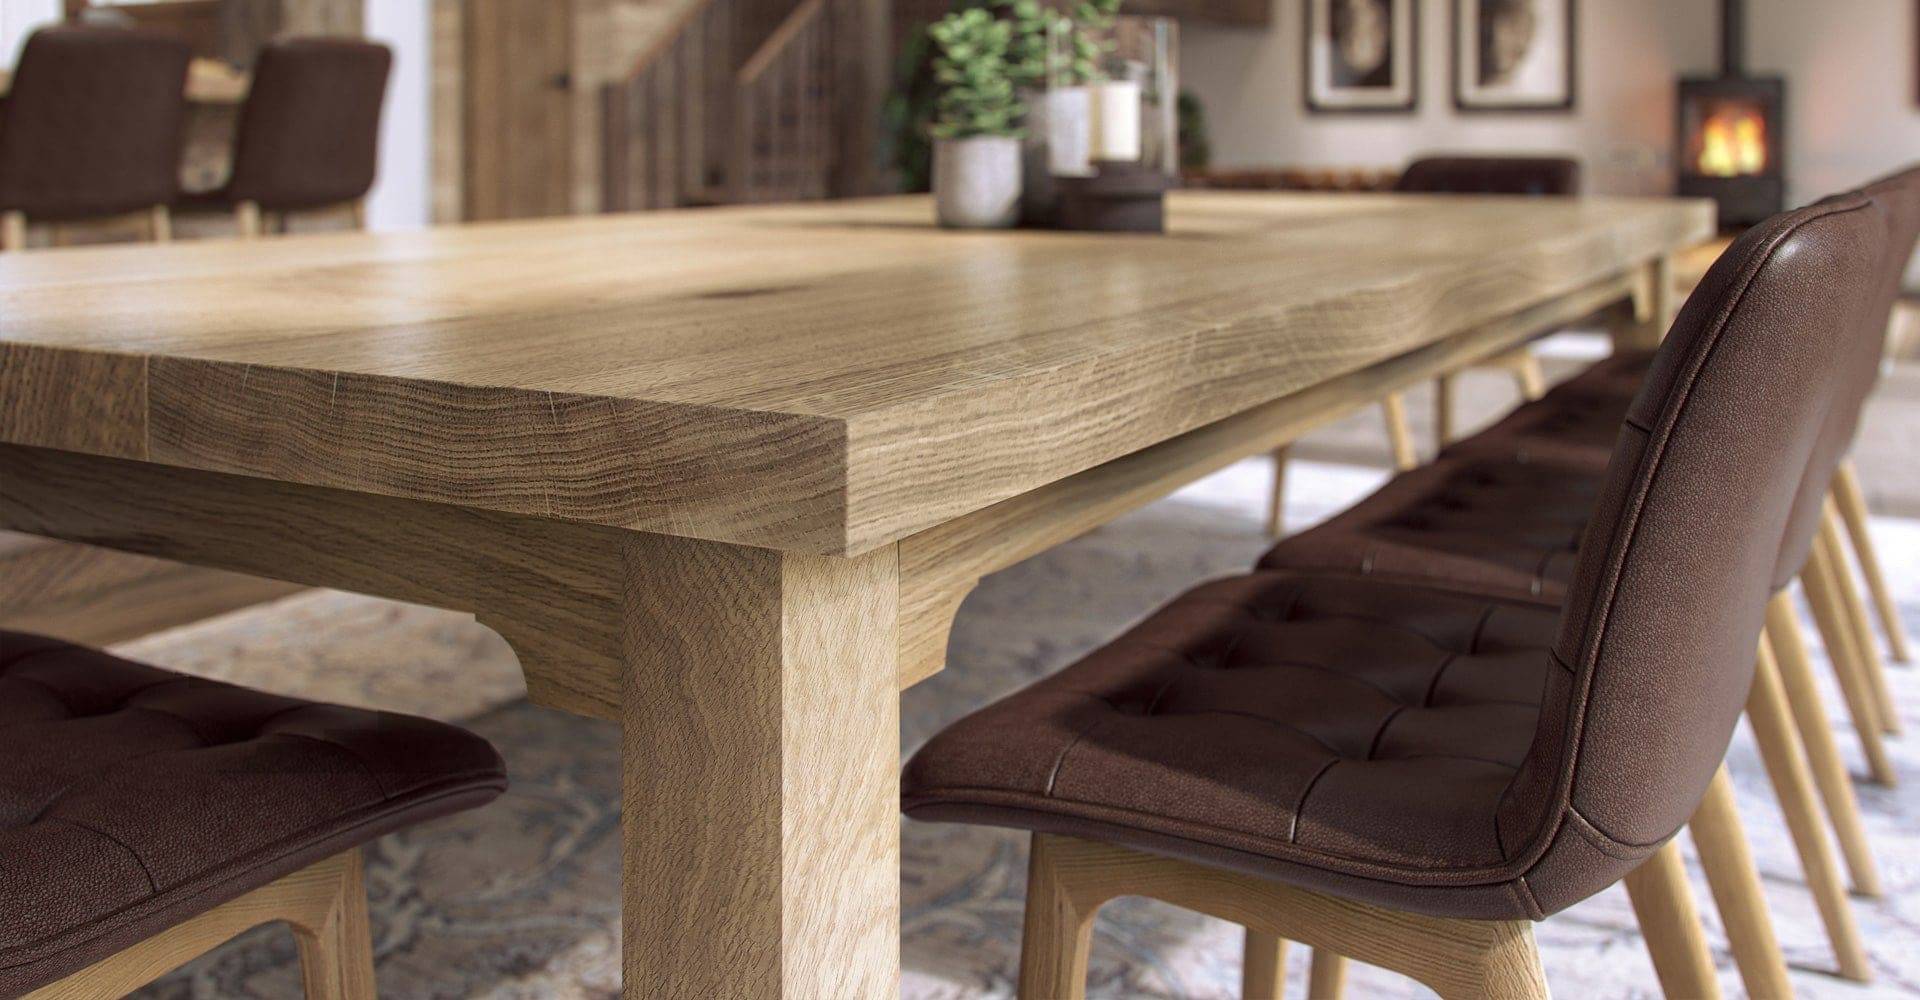 Bespoke-Oak-Dining-Table-abacus-tables-classics-style